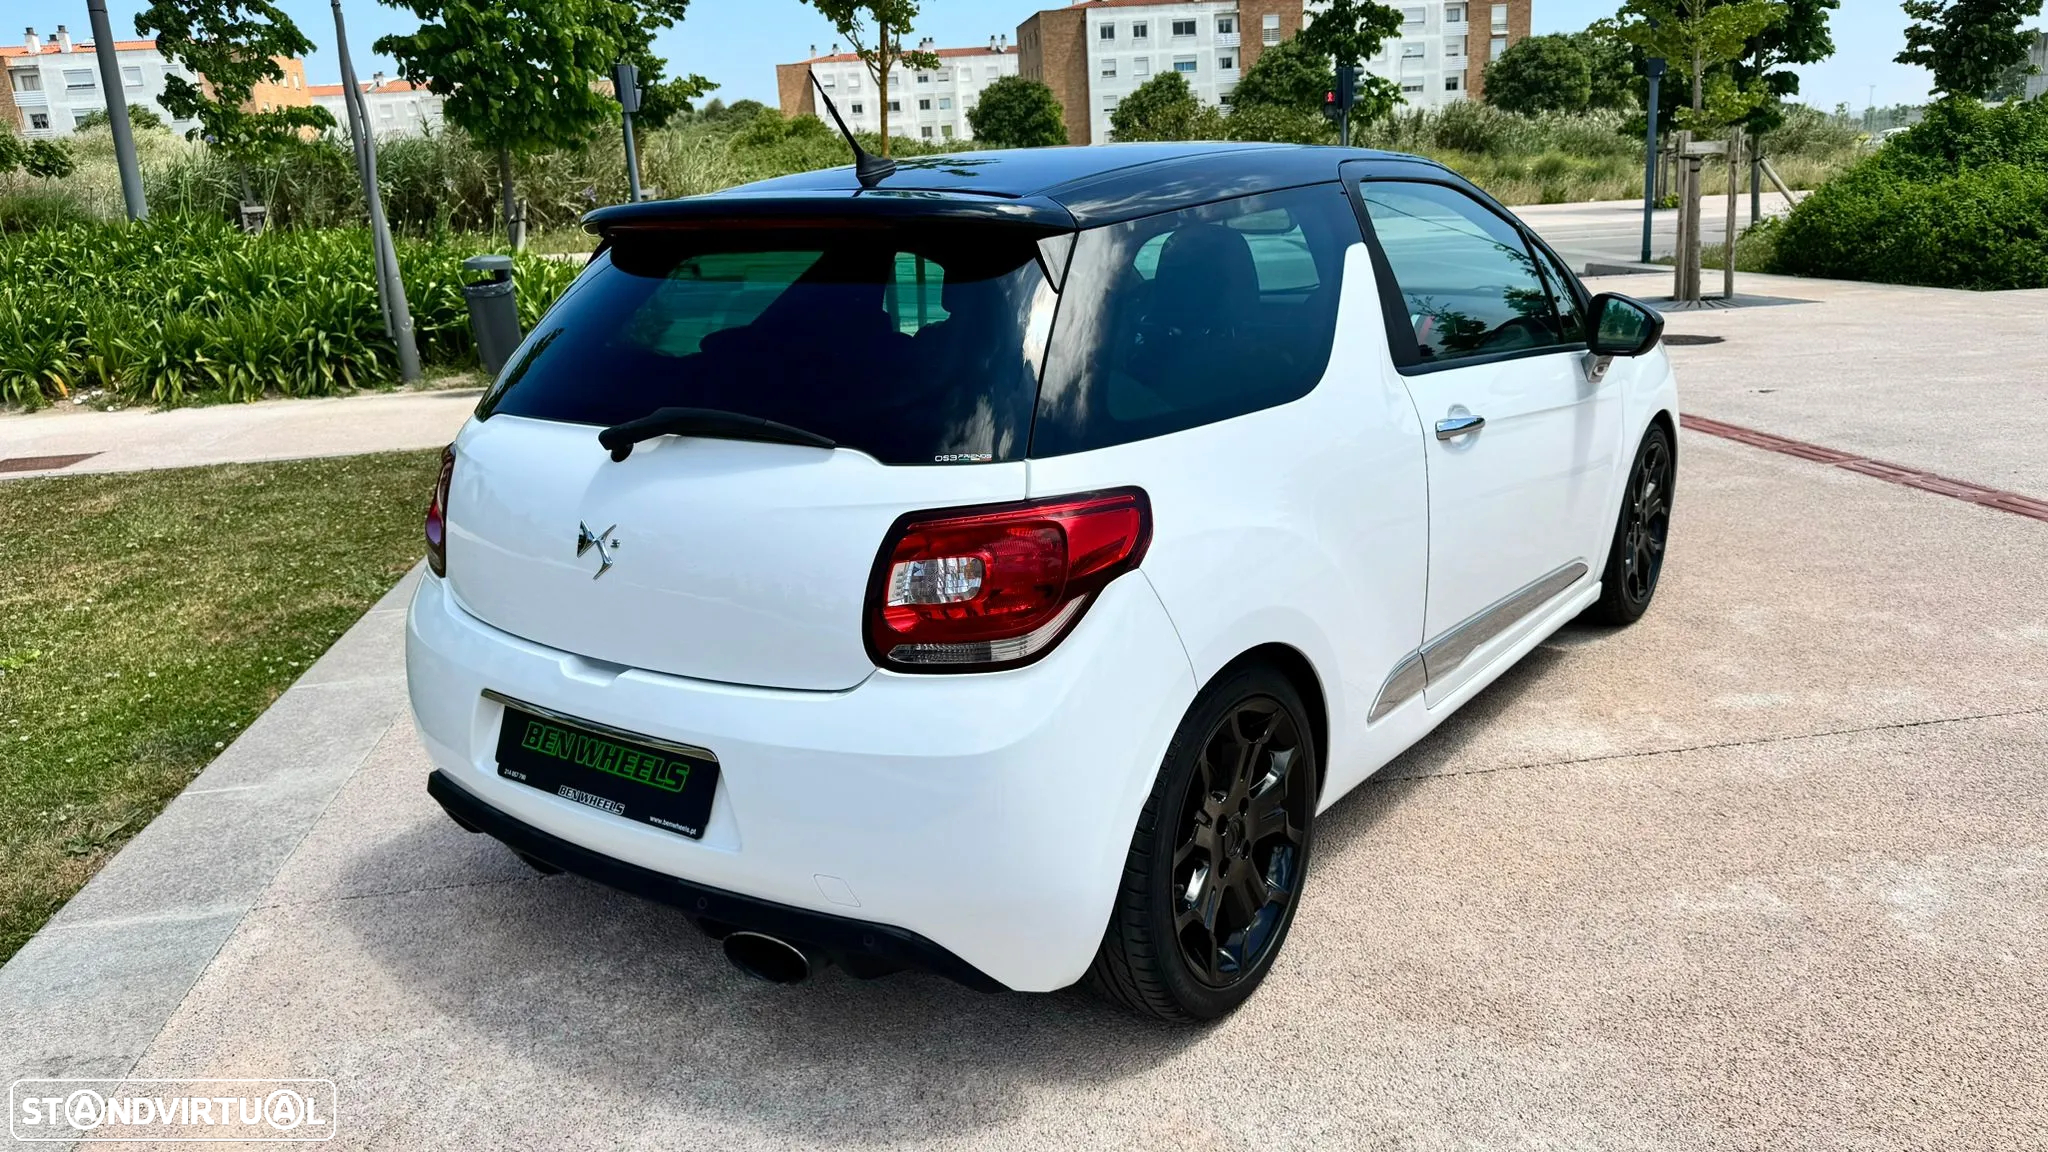 Citroën DS3 1.6 HDi Airdream Sport Chic - 6